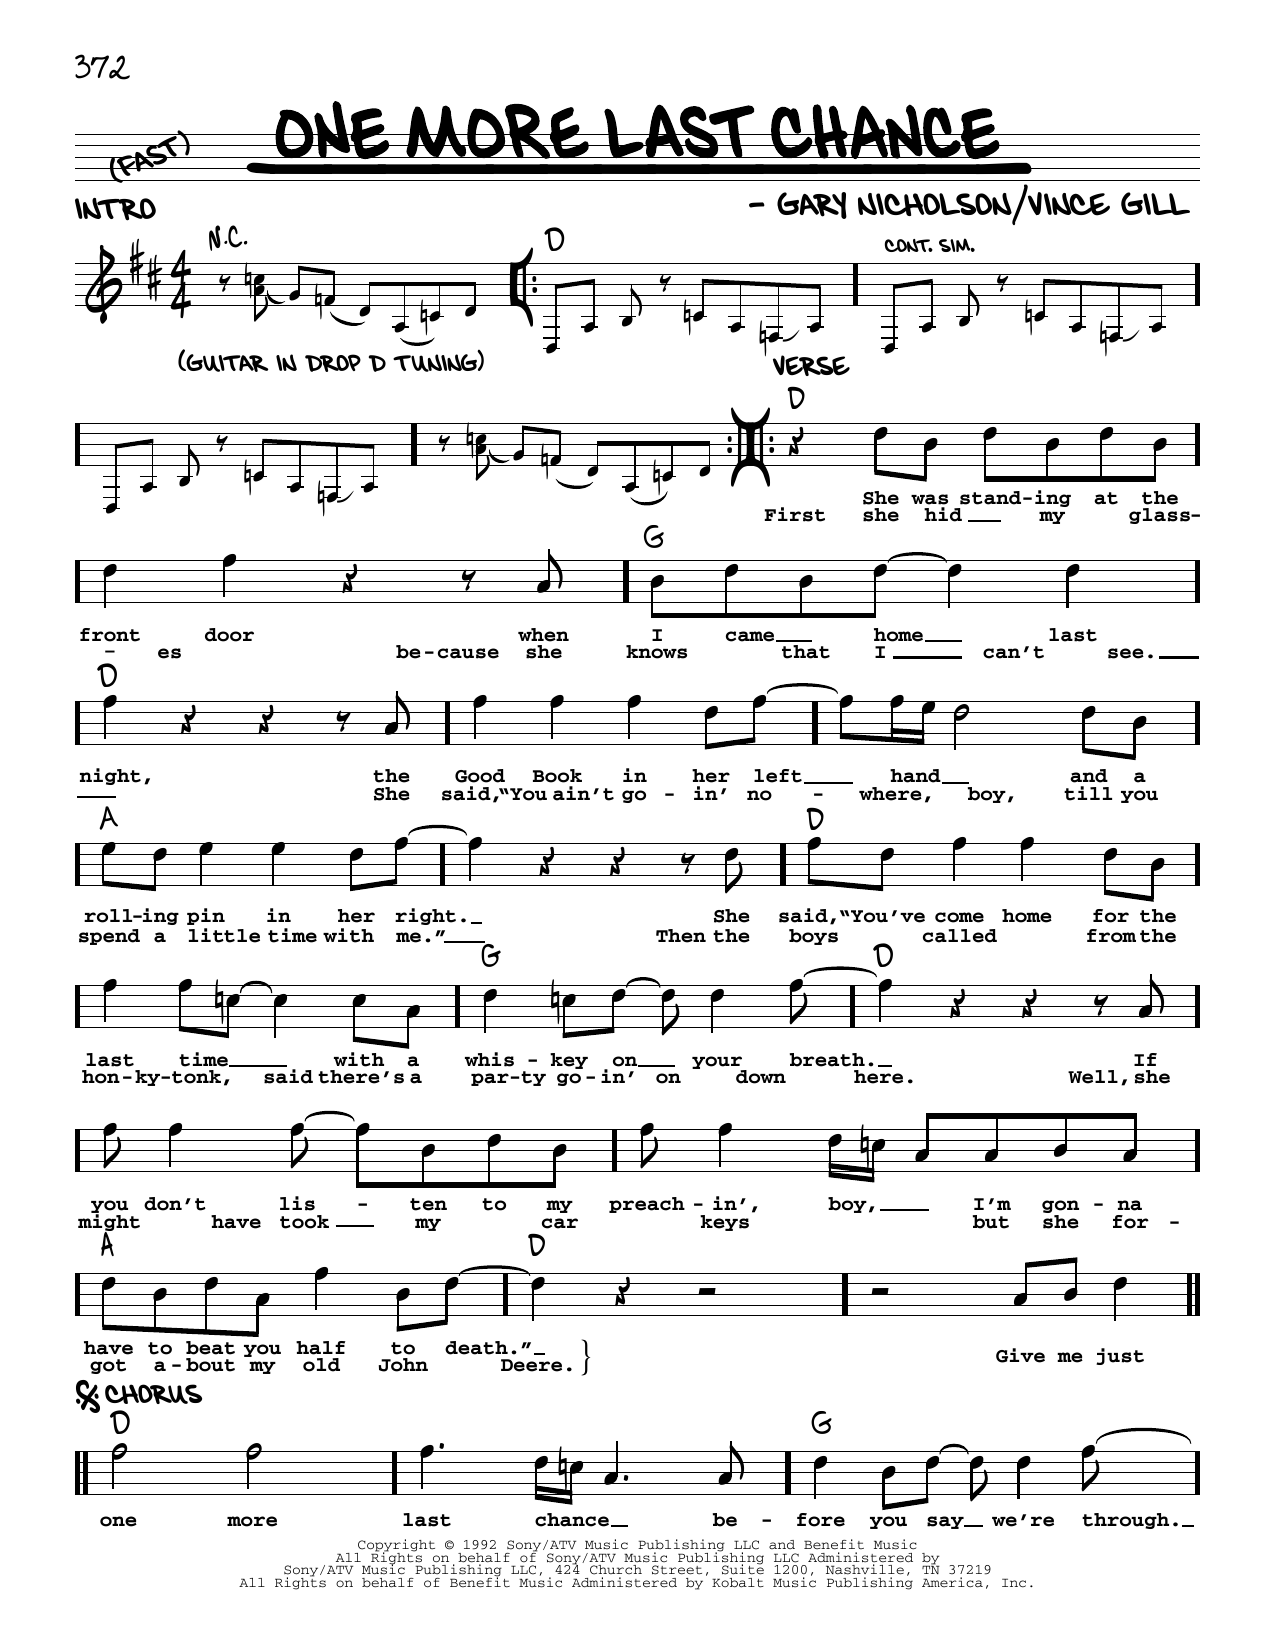 Download Vince Gill One More Last Chance Sheet Music